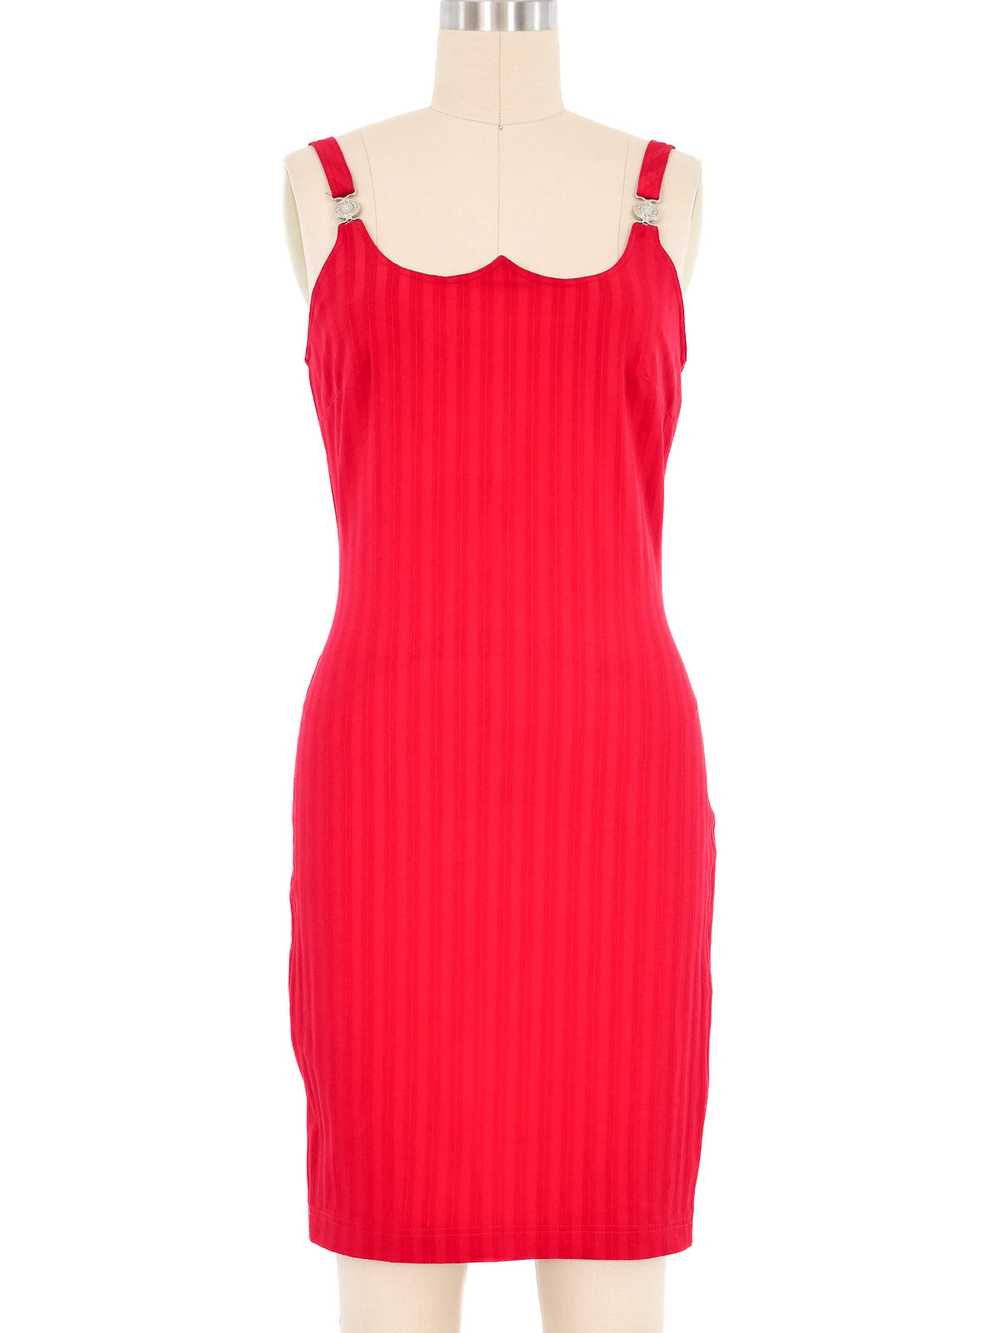 Versace Jeans Couture Red Striped Bodycon Dress - image 1